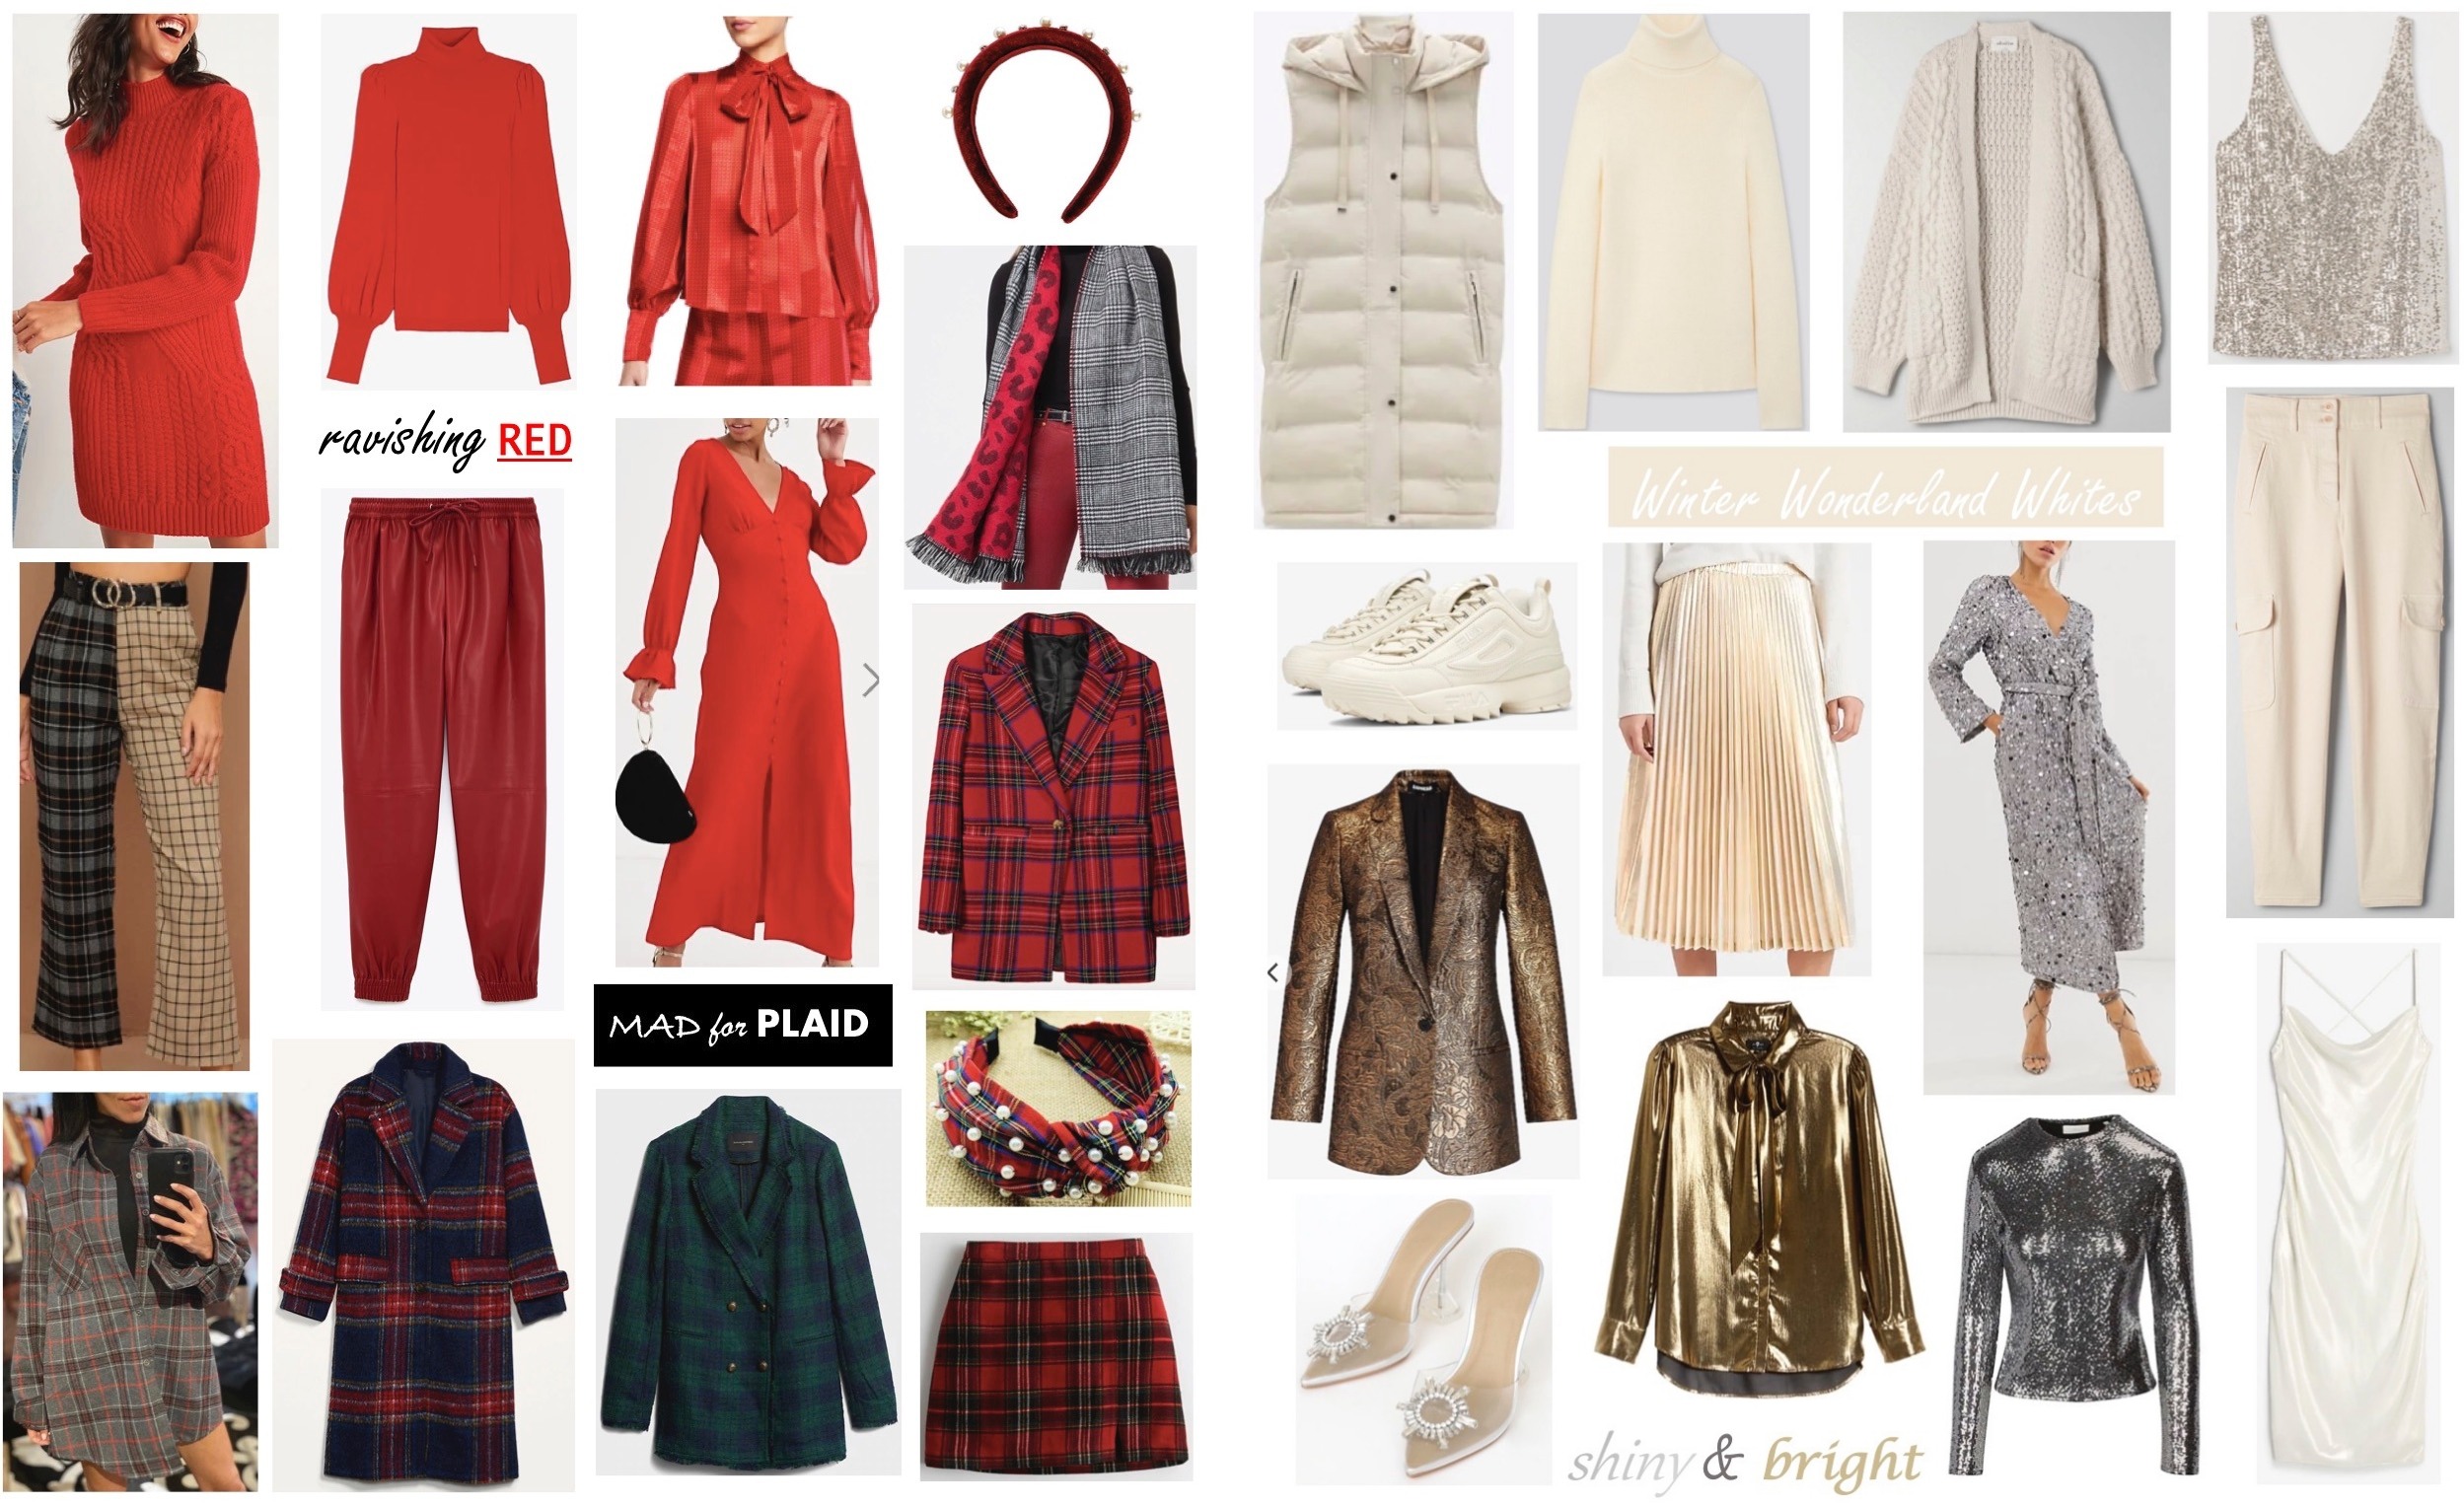 Winter Lookbook: But What Would I Wear?